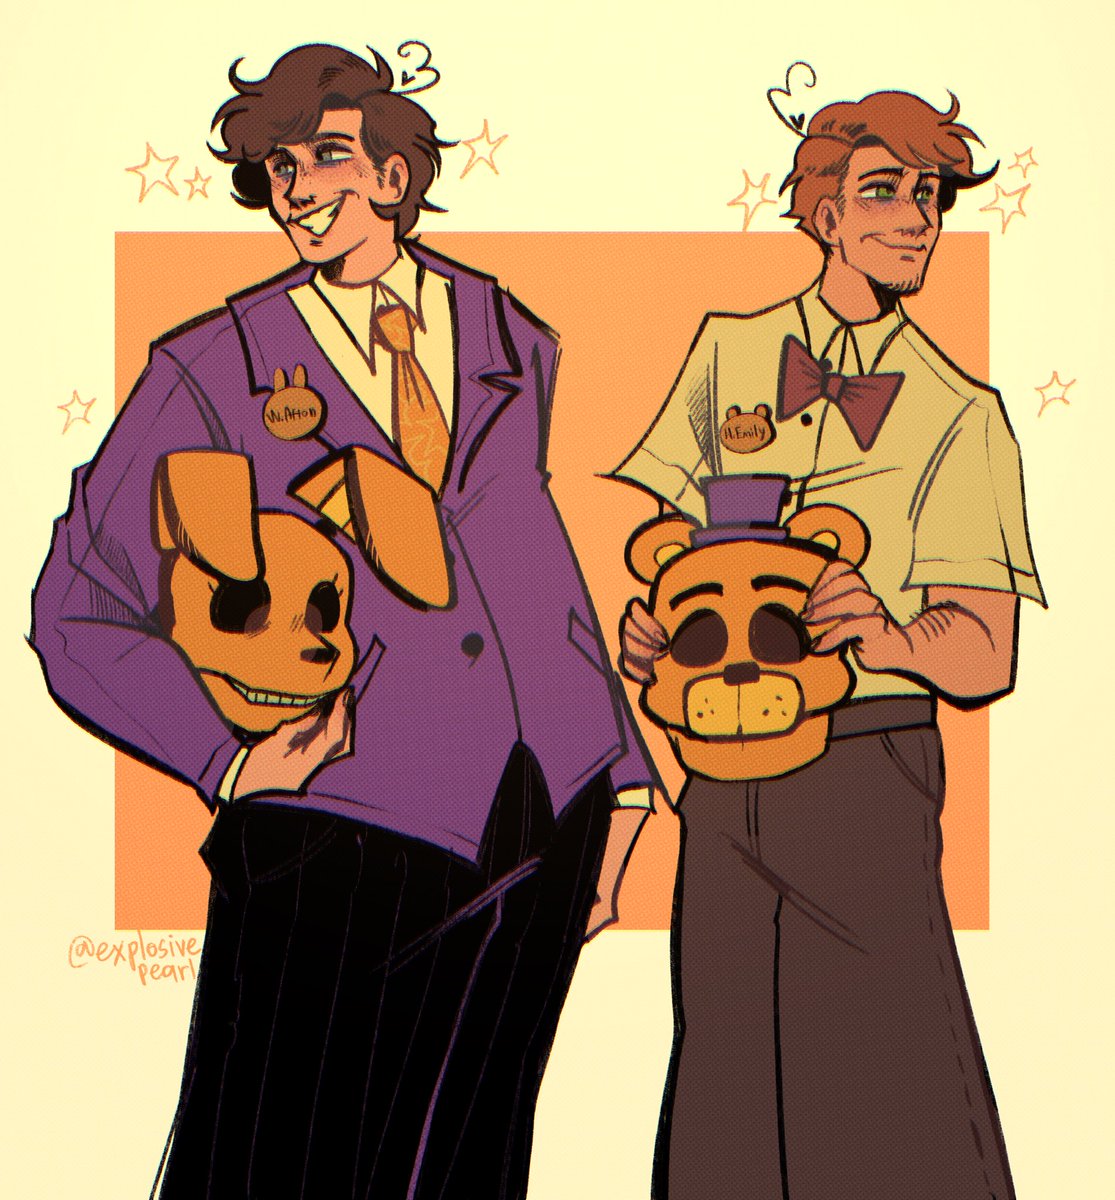 this is such a cute gay couple I hope nothing bad happens to them 
#fnaf #williamafton #henryemily #willry